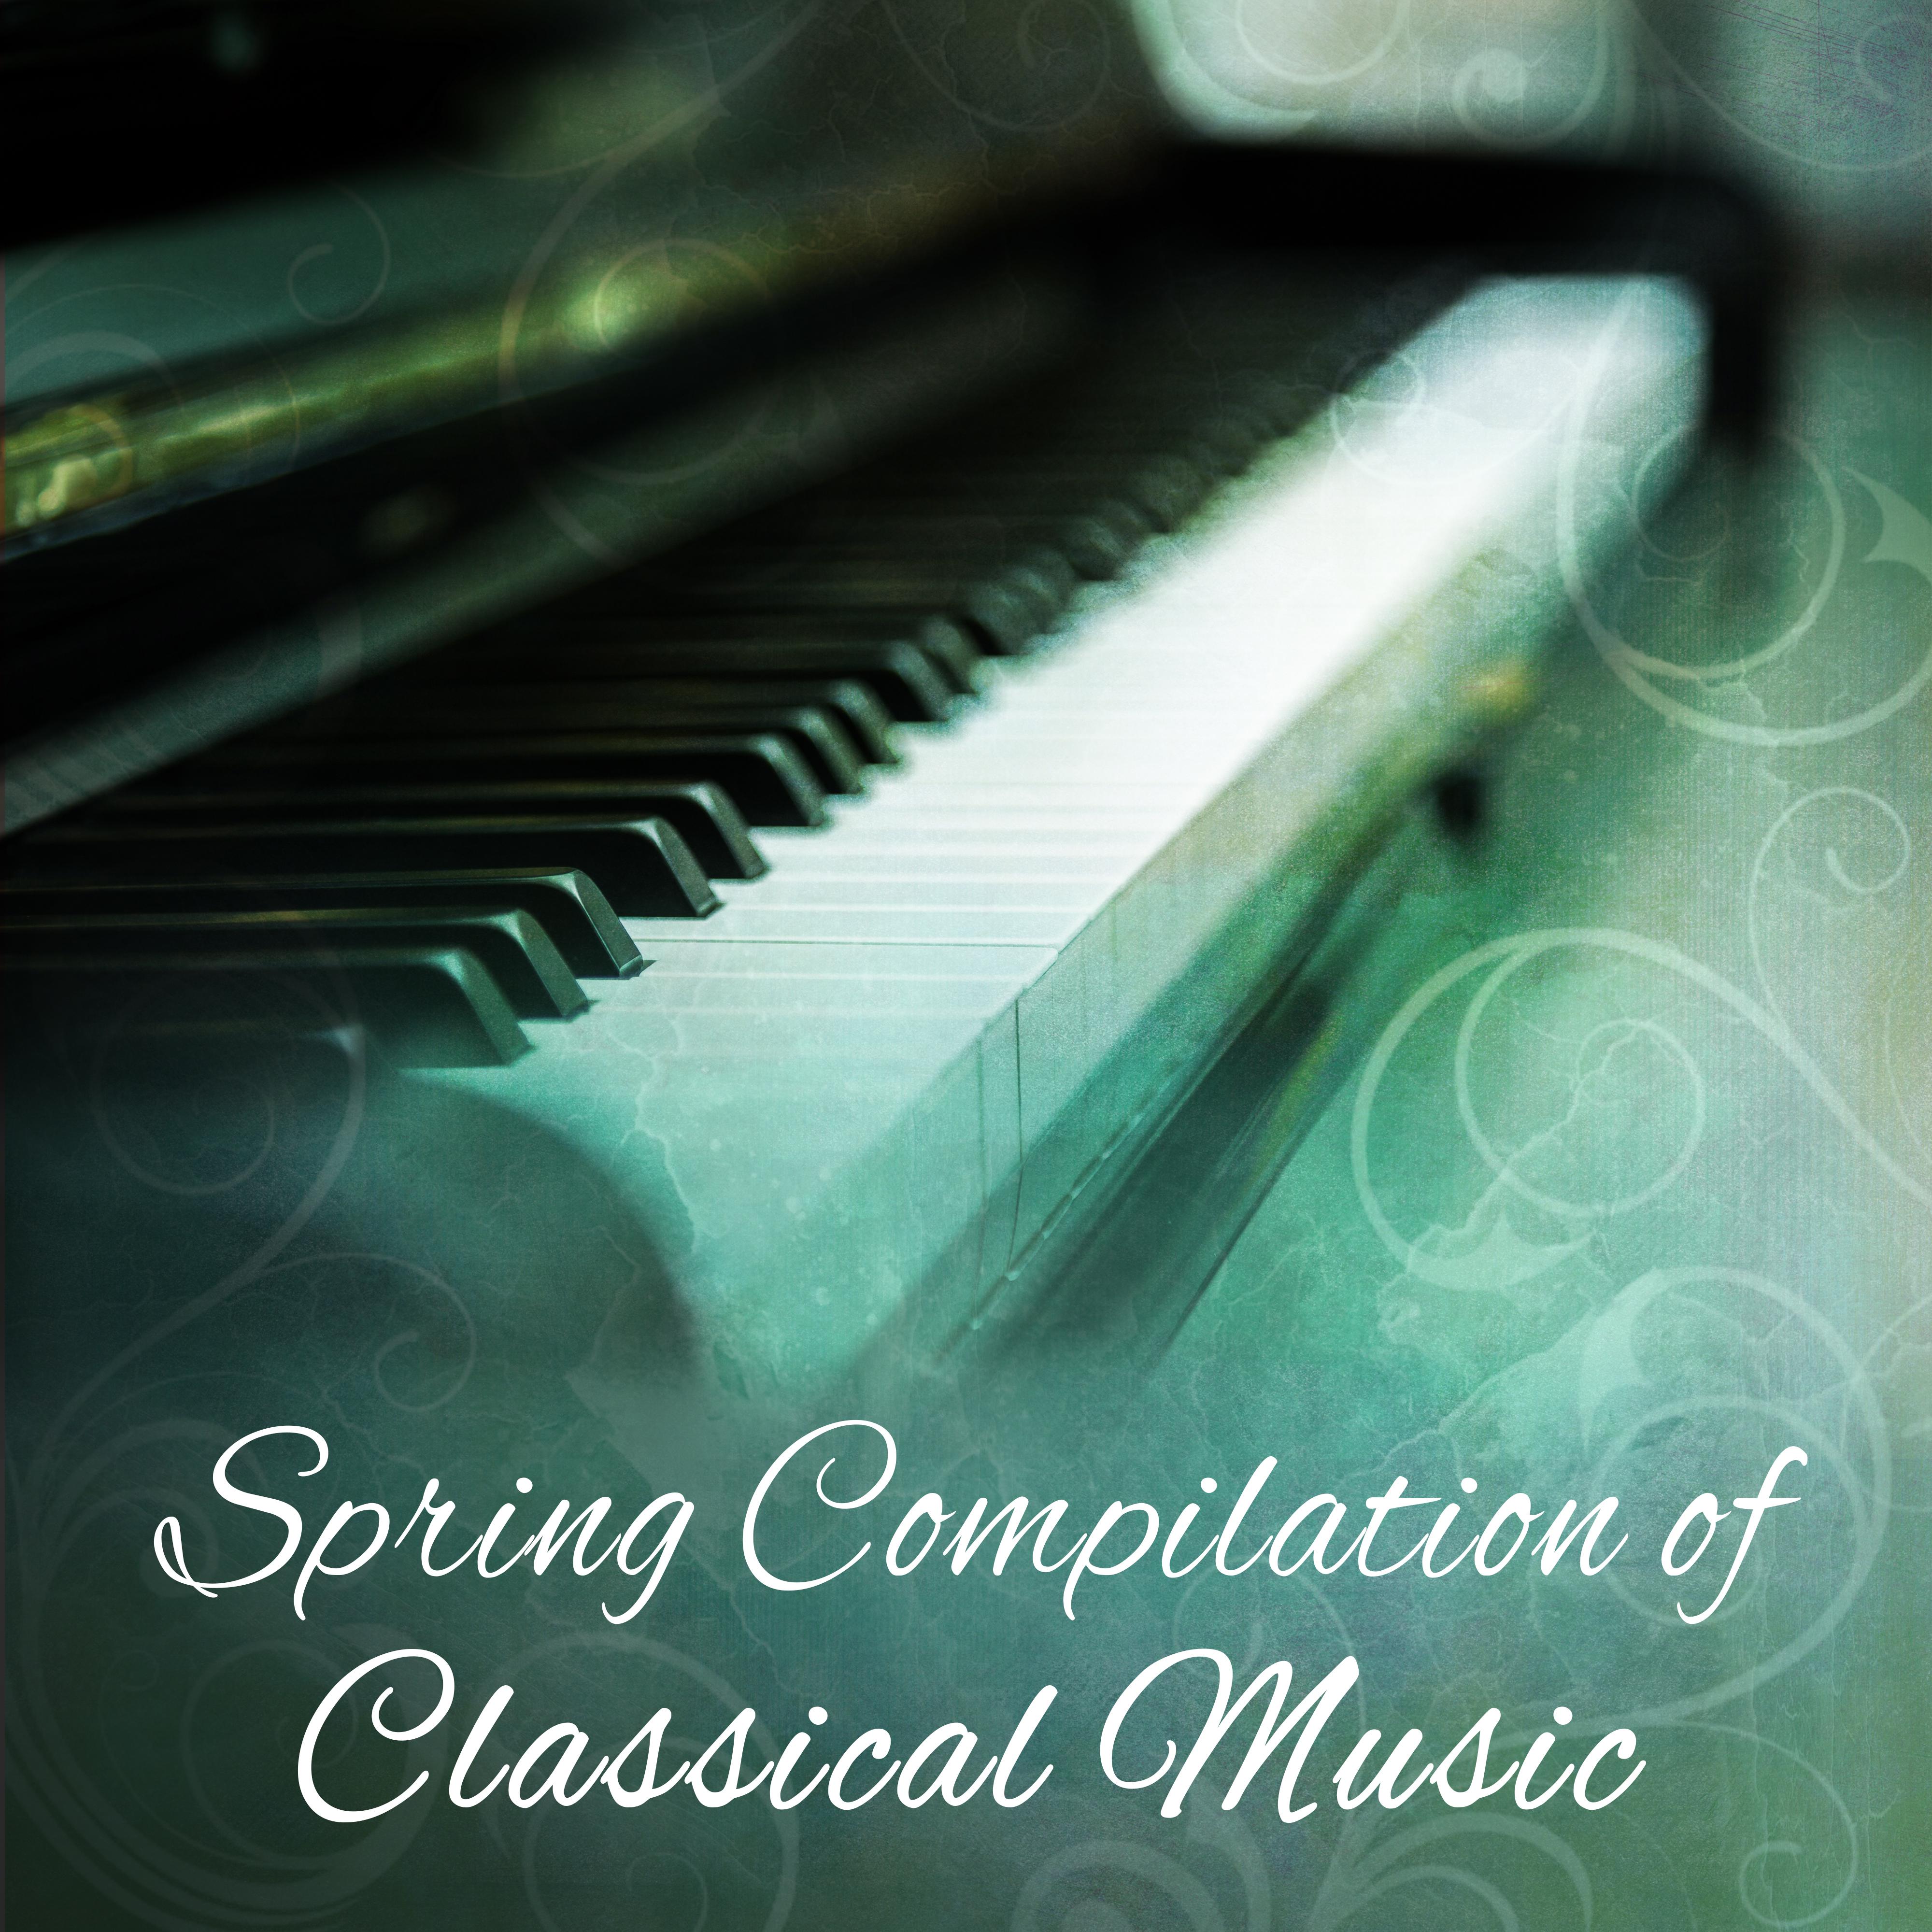 Spring Compilation of Classical Music